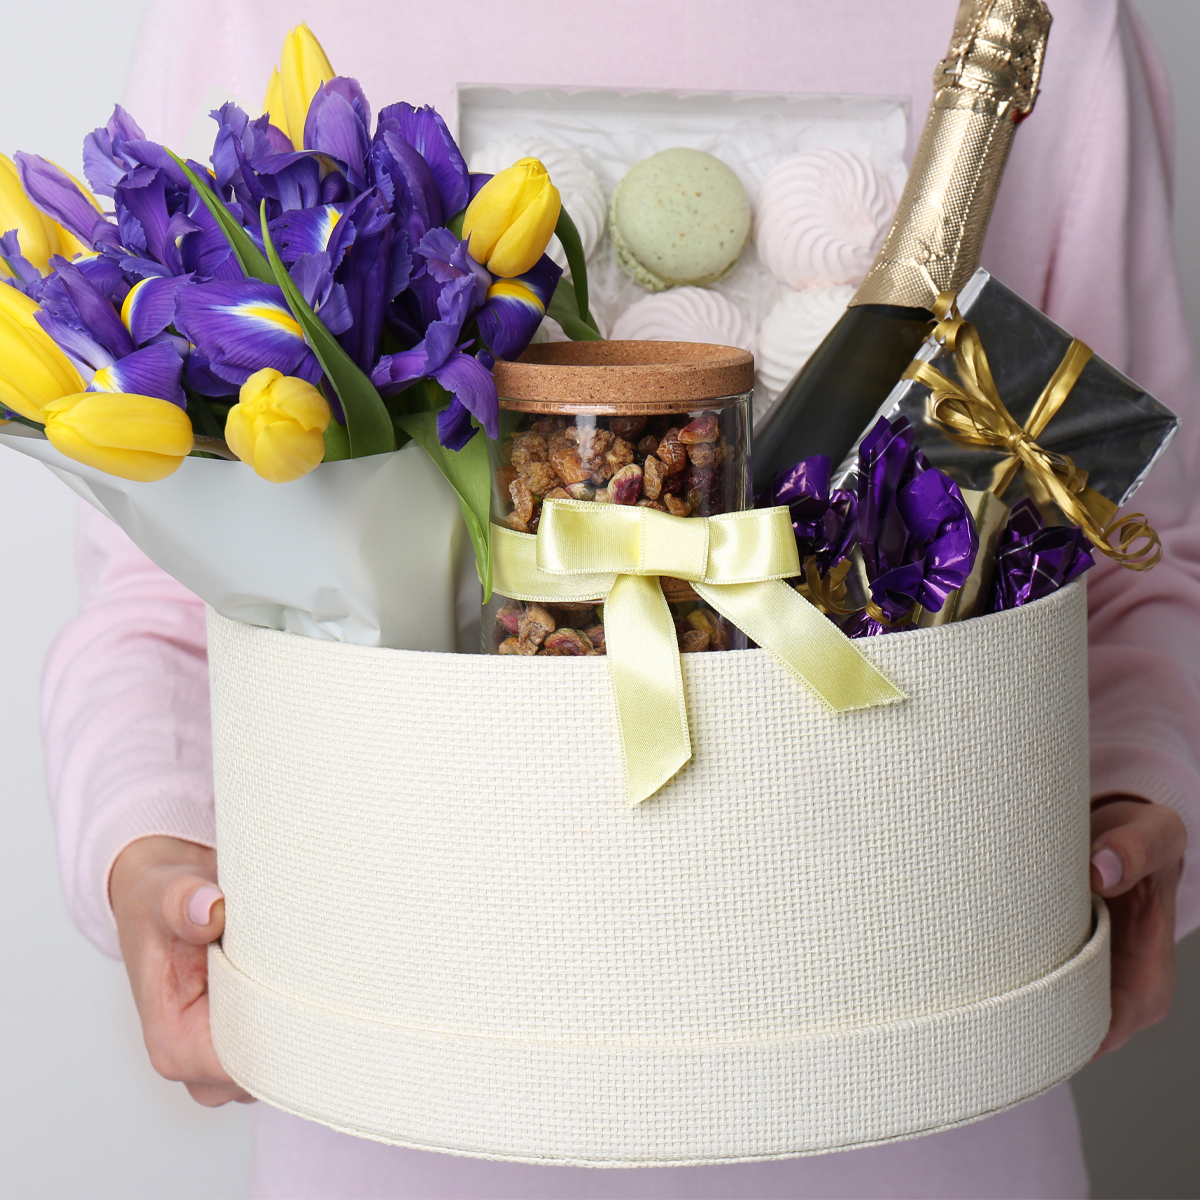 10 Gift Baskets That Will Arrive Just in Time for Mother’s Day